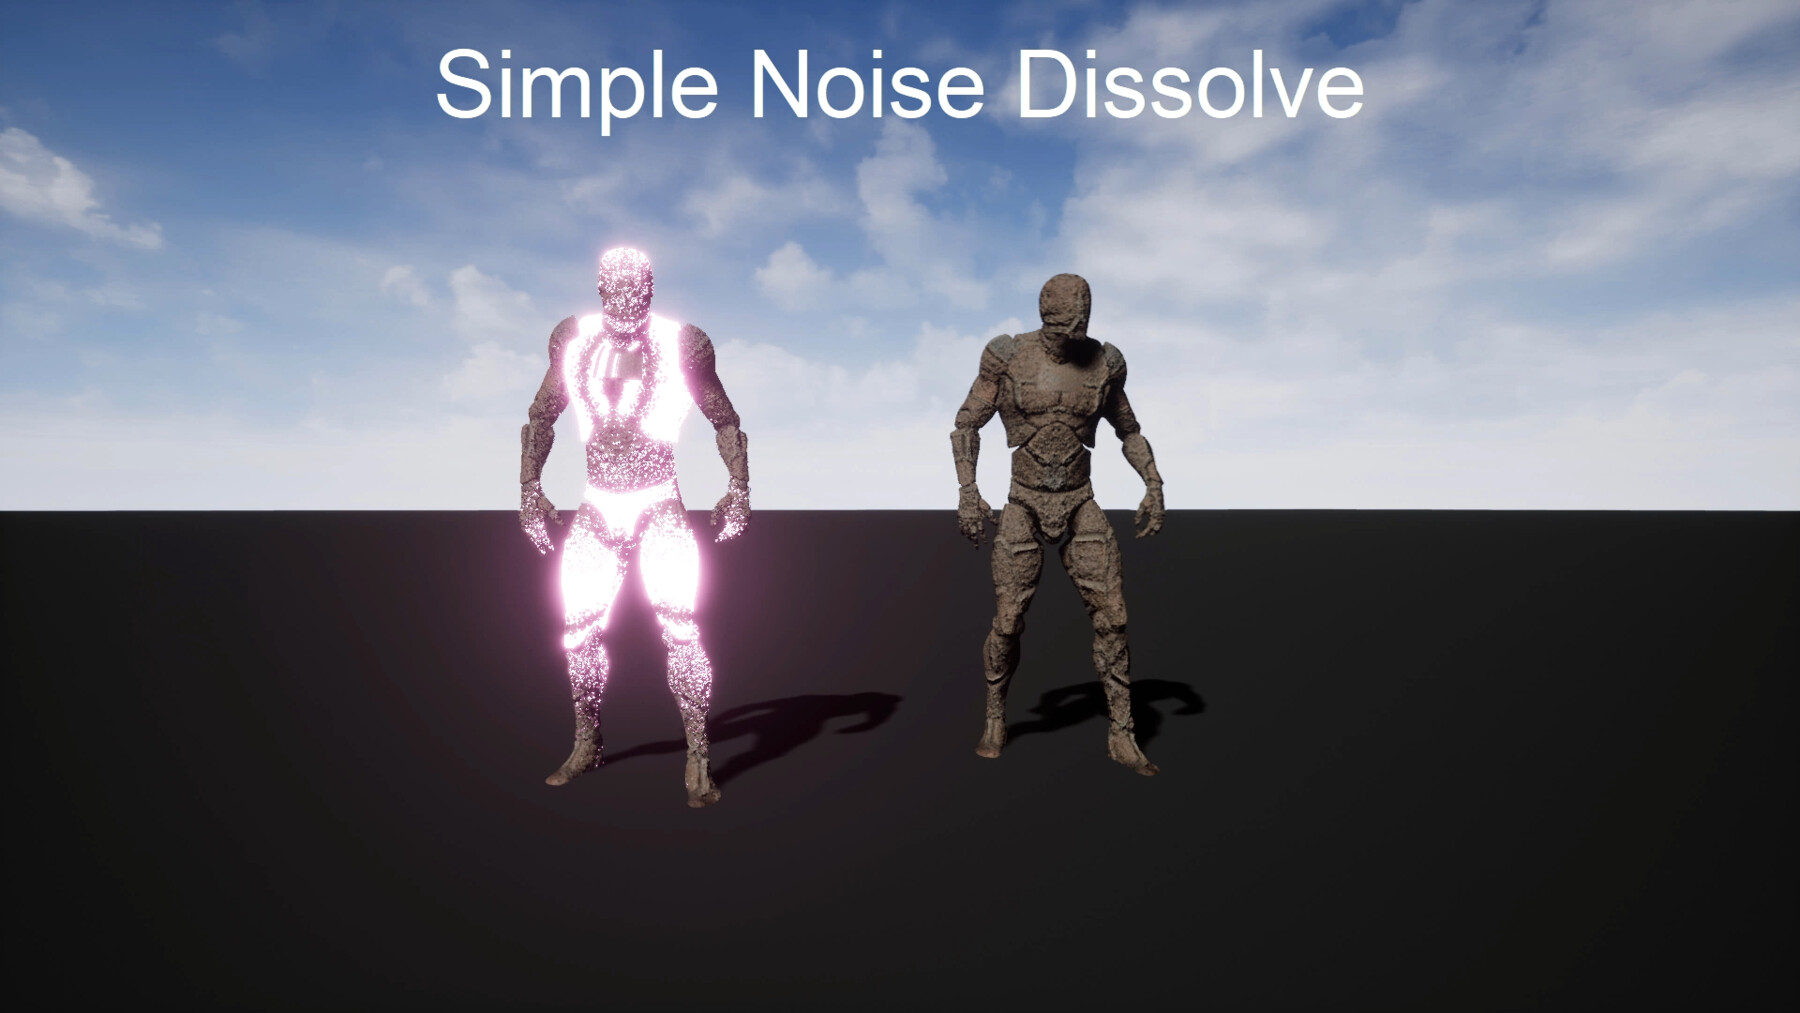 Easy Dissolve Material in Visual Effects - UE Marketplace